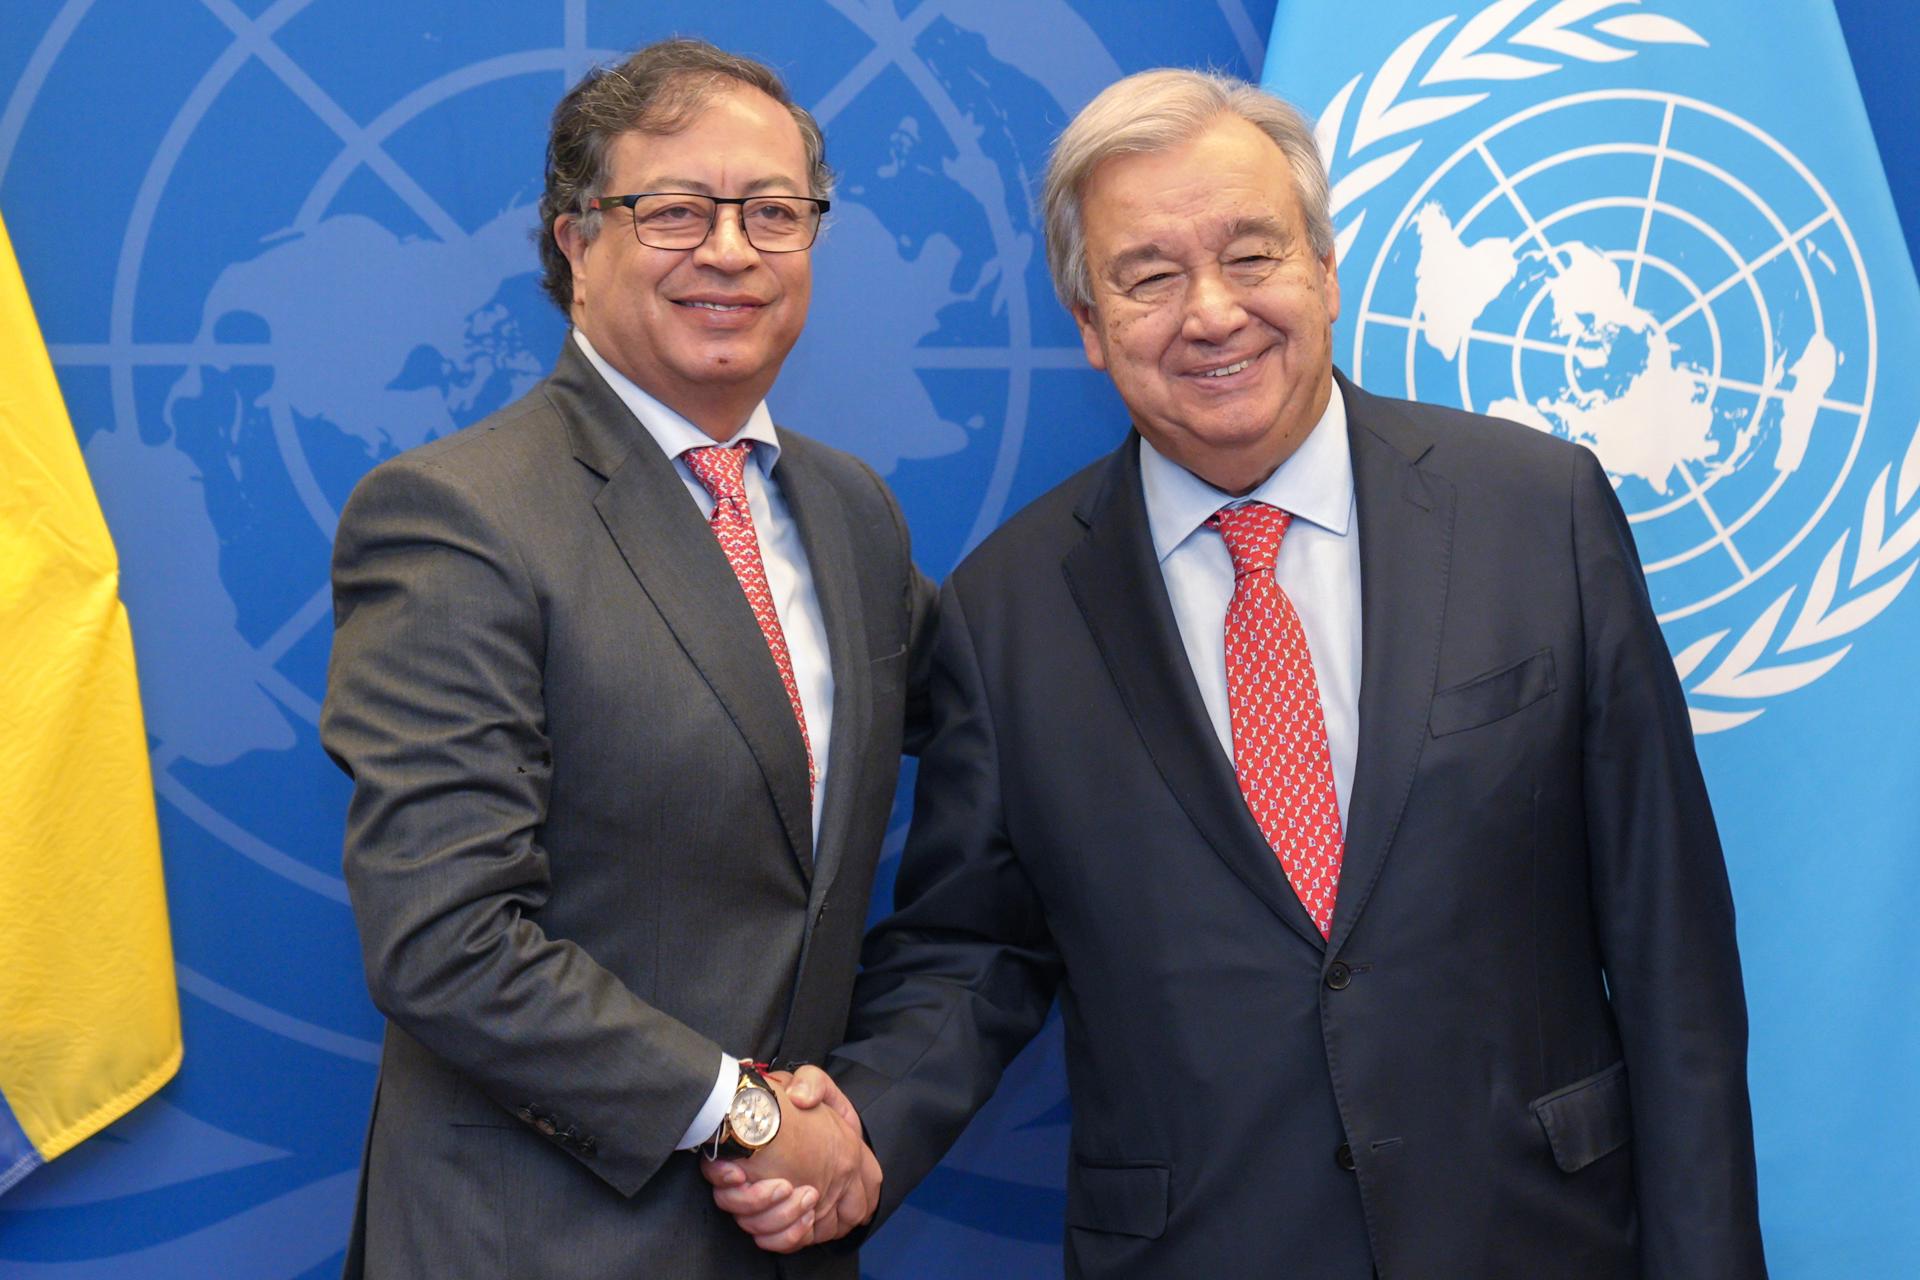 Petro talks with Guterres about drugs, peace and the environment